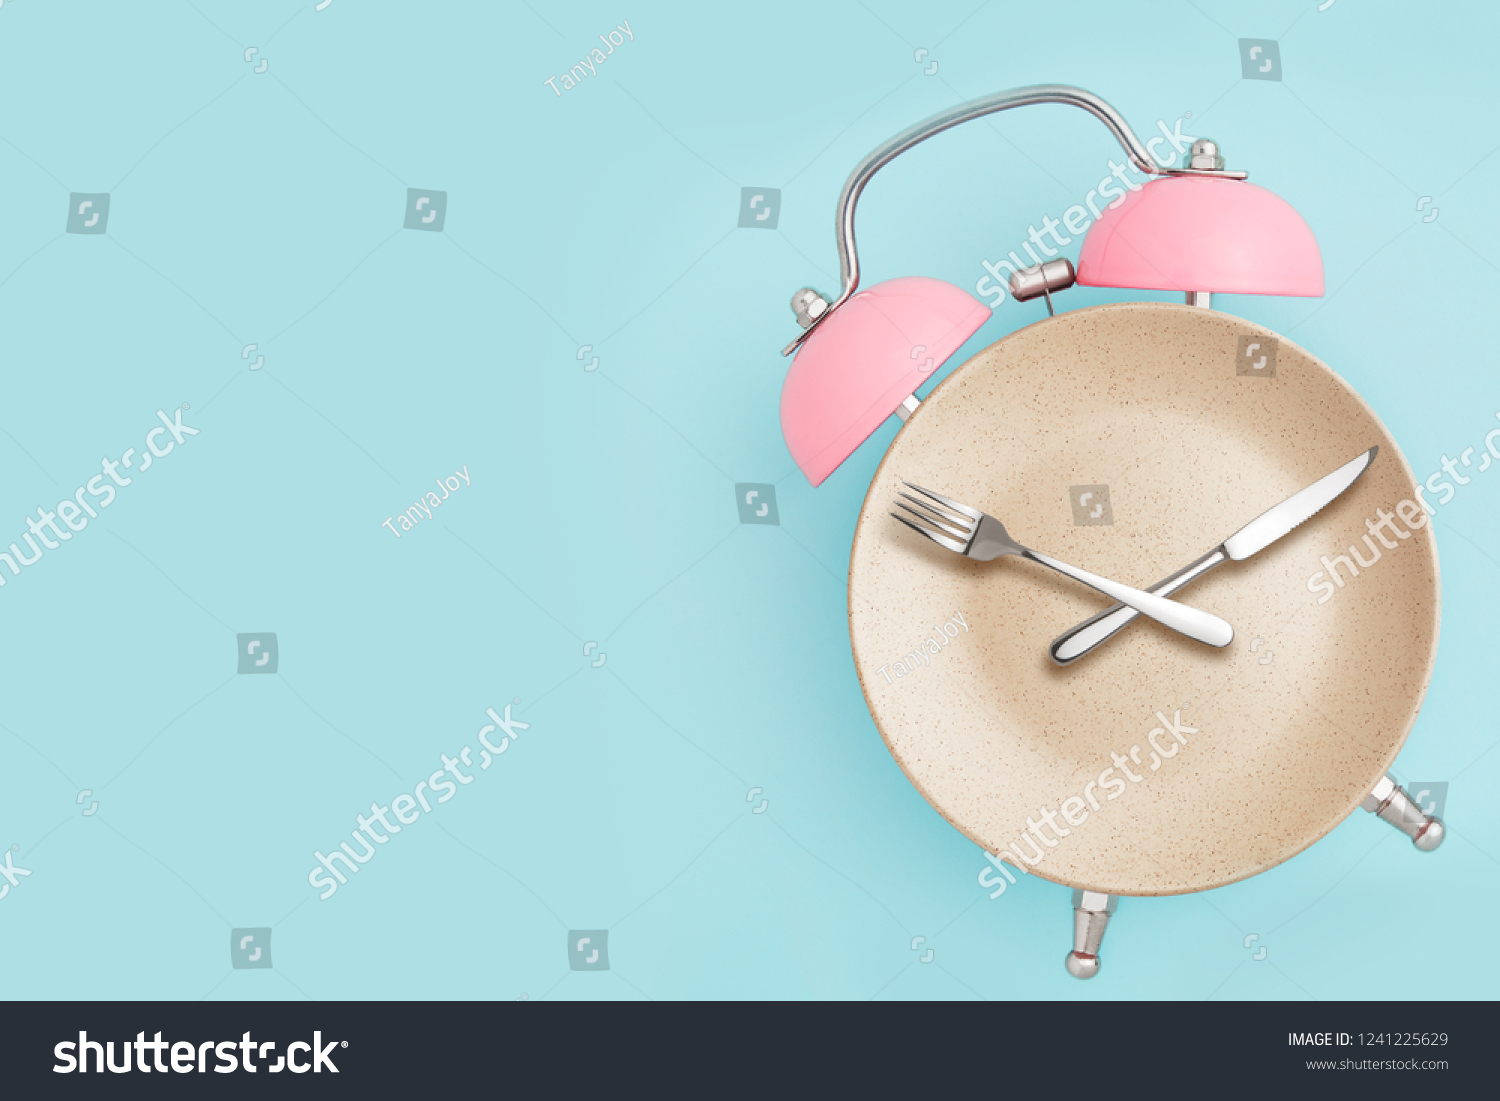 Alarm clock and plate with cutlery . Concept of intermittent fasting, lunchtime, diet and weight loss #1241225629